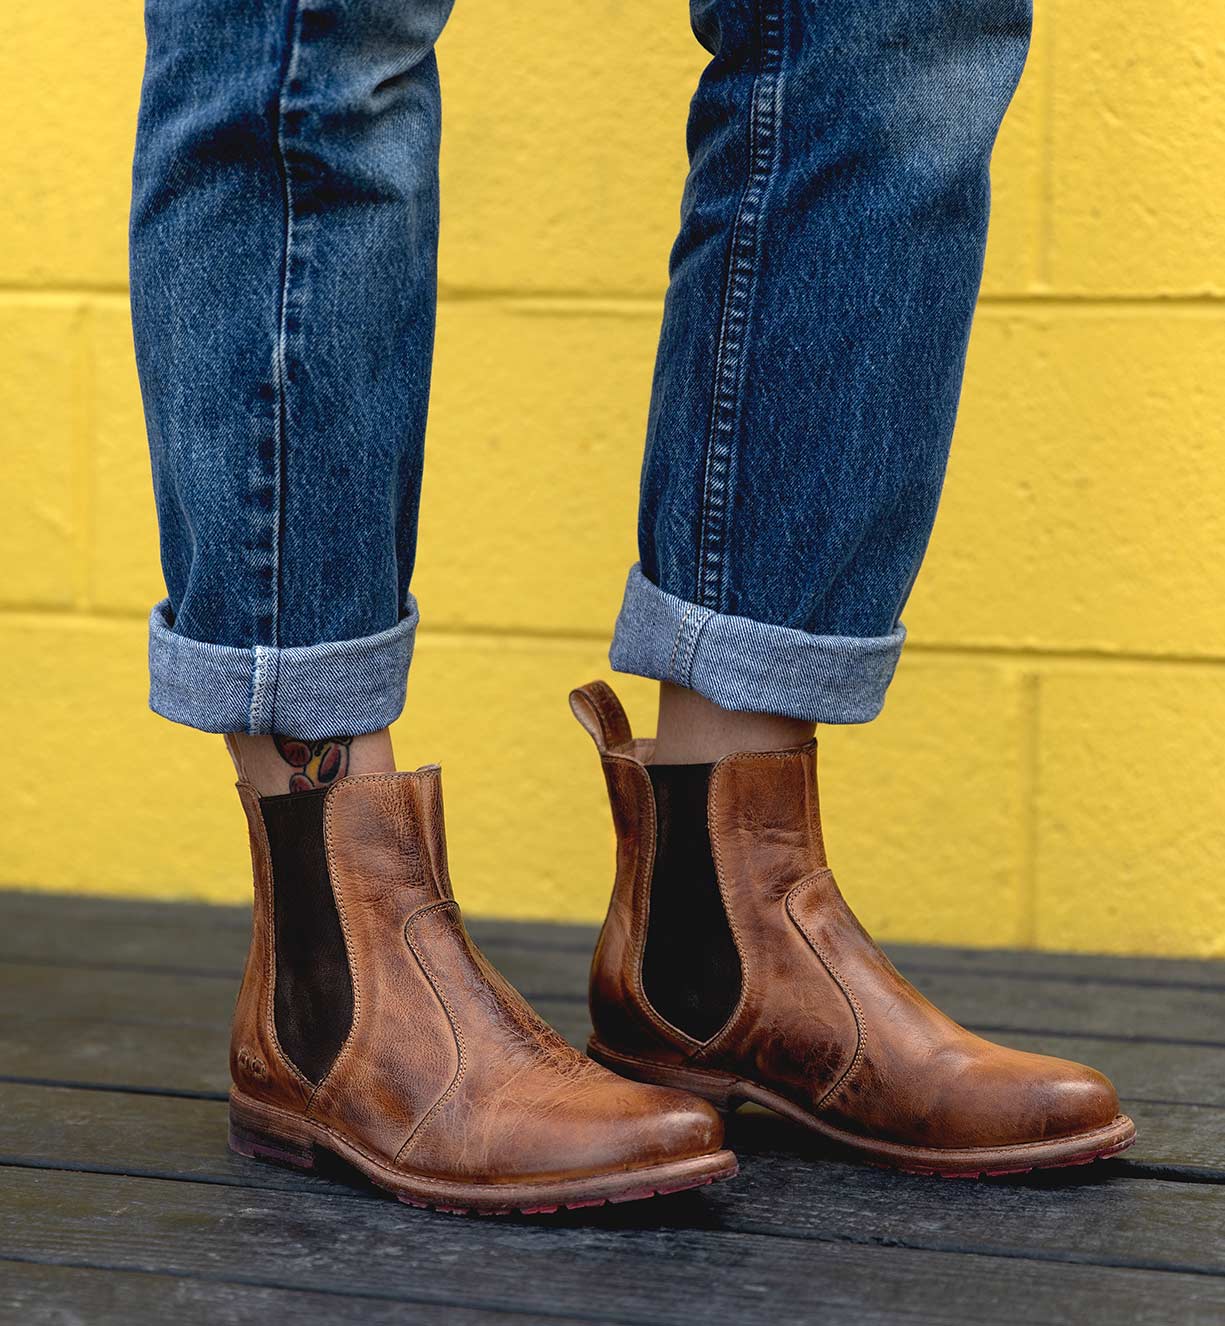 A person wearing Nandi tan pure leather chelsea boots.